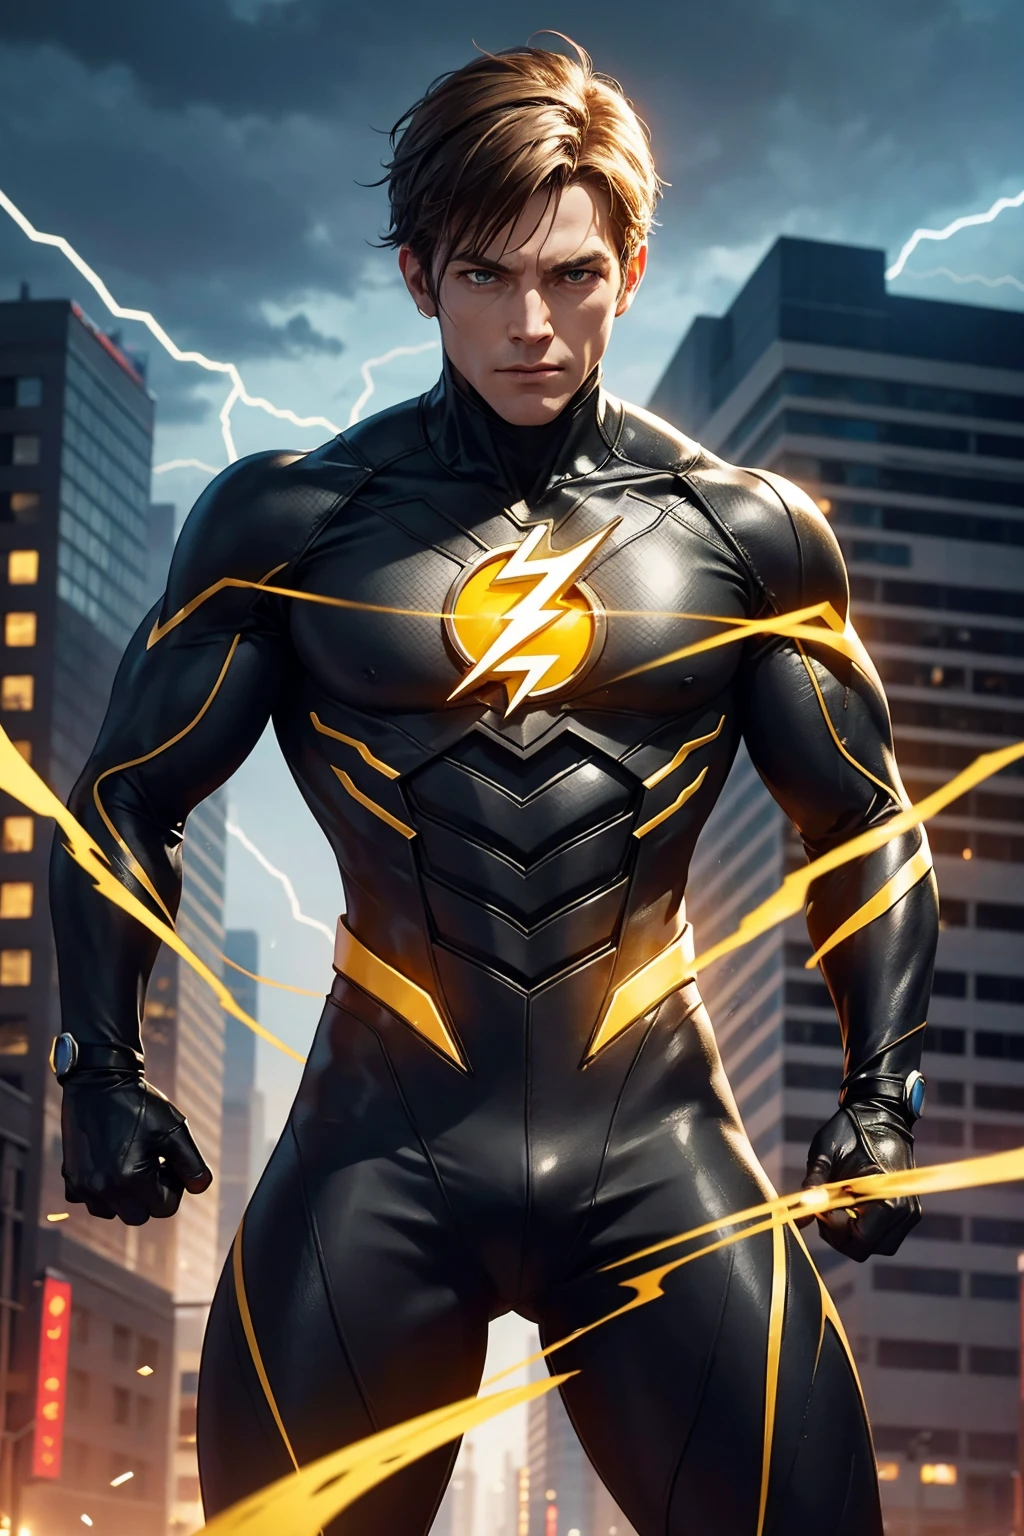 Reverse Flash stands atop a lightning-struck tower, his eyes glowing with malevolent power. His costume is a black and red blur, with a glowing yellow lightning bolt emblazoned on his chest. His hands crackle with electrical energy, ready to unleash his devastating power.

Every detail is rendered with incredible realism, from the individual strands of Reverse Flash's hair to the intricate textures of his costume. The city is a sprawling metropolis, teeming with life and neon lights. The sound design is immersive and visceral, from the crackle of electrical energy to the thunderous roar of Reverse Flash's sonic booms.

